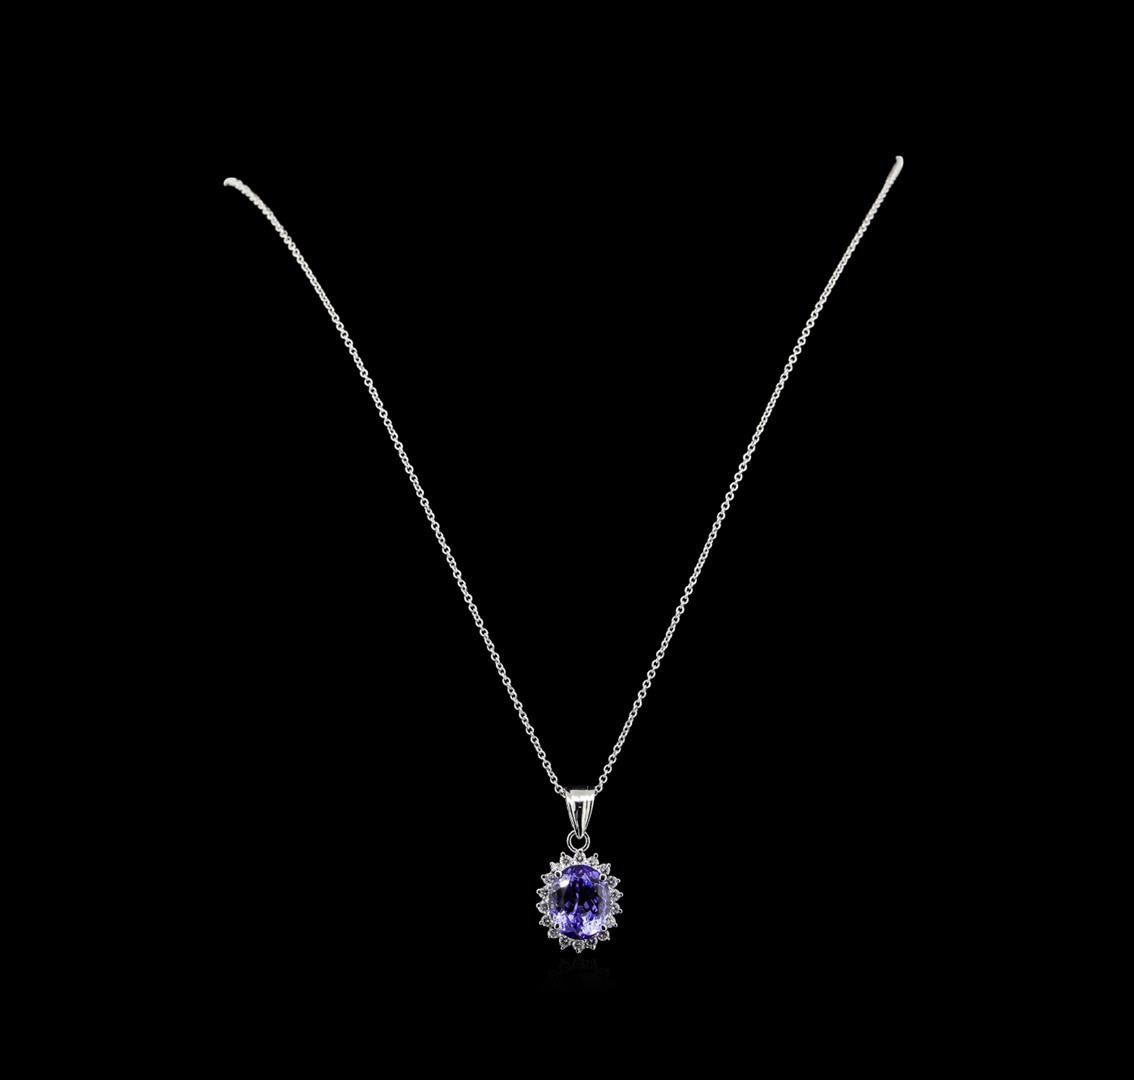 4.65 ctw Tanzanite and Diamond Pendant With Chain - 14KT White Gold